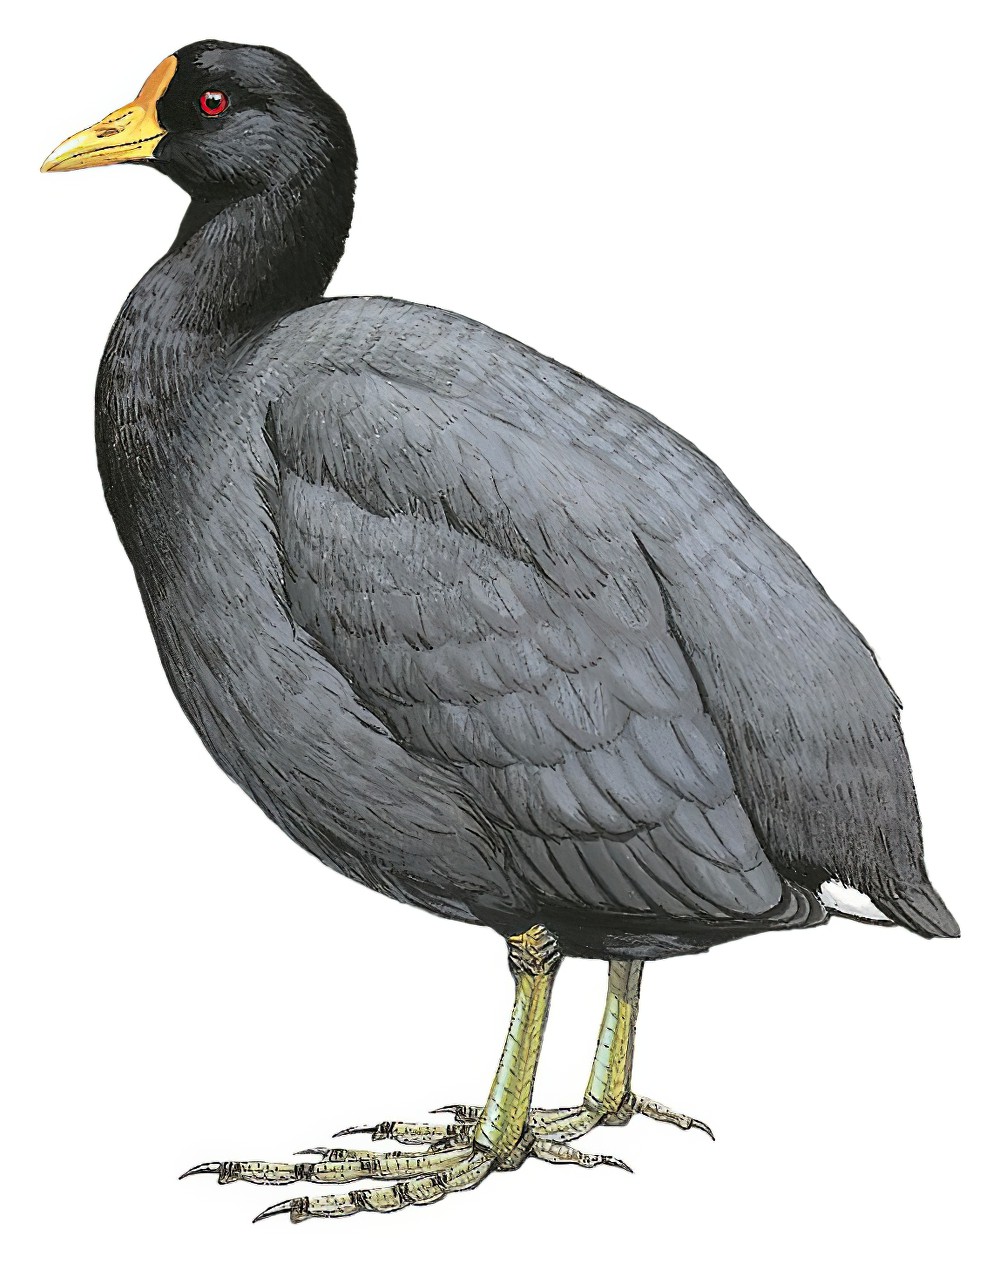 White-winged Coot / Fulica leucoptera